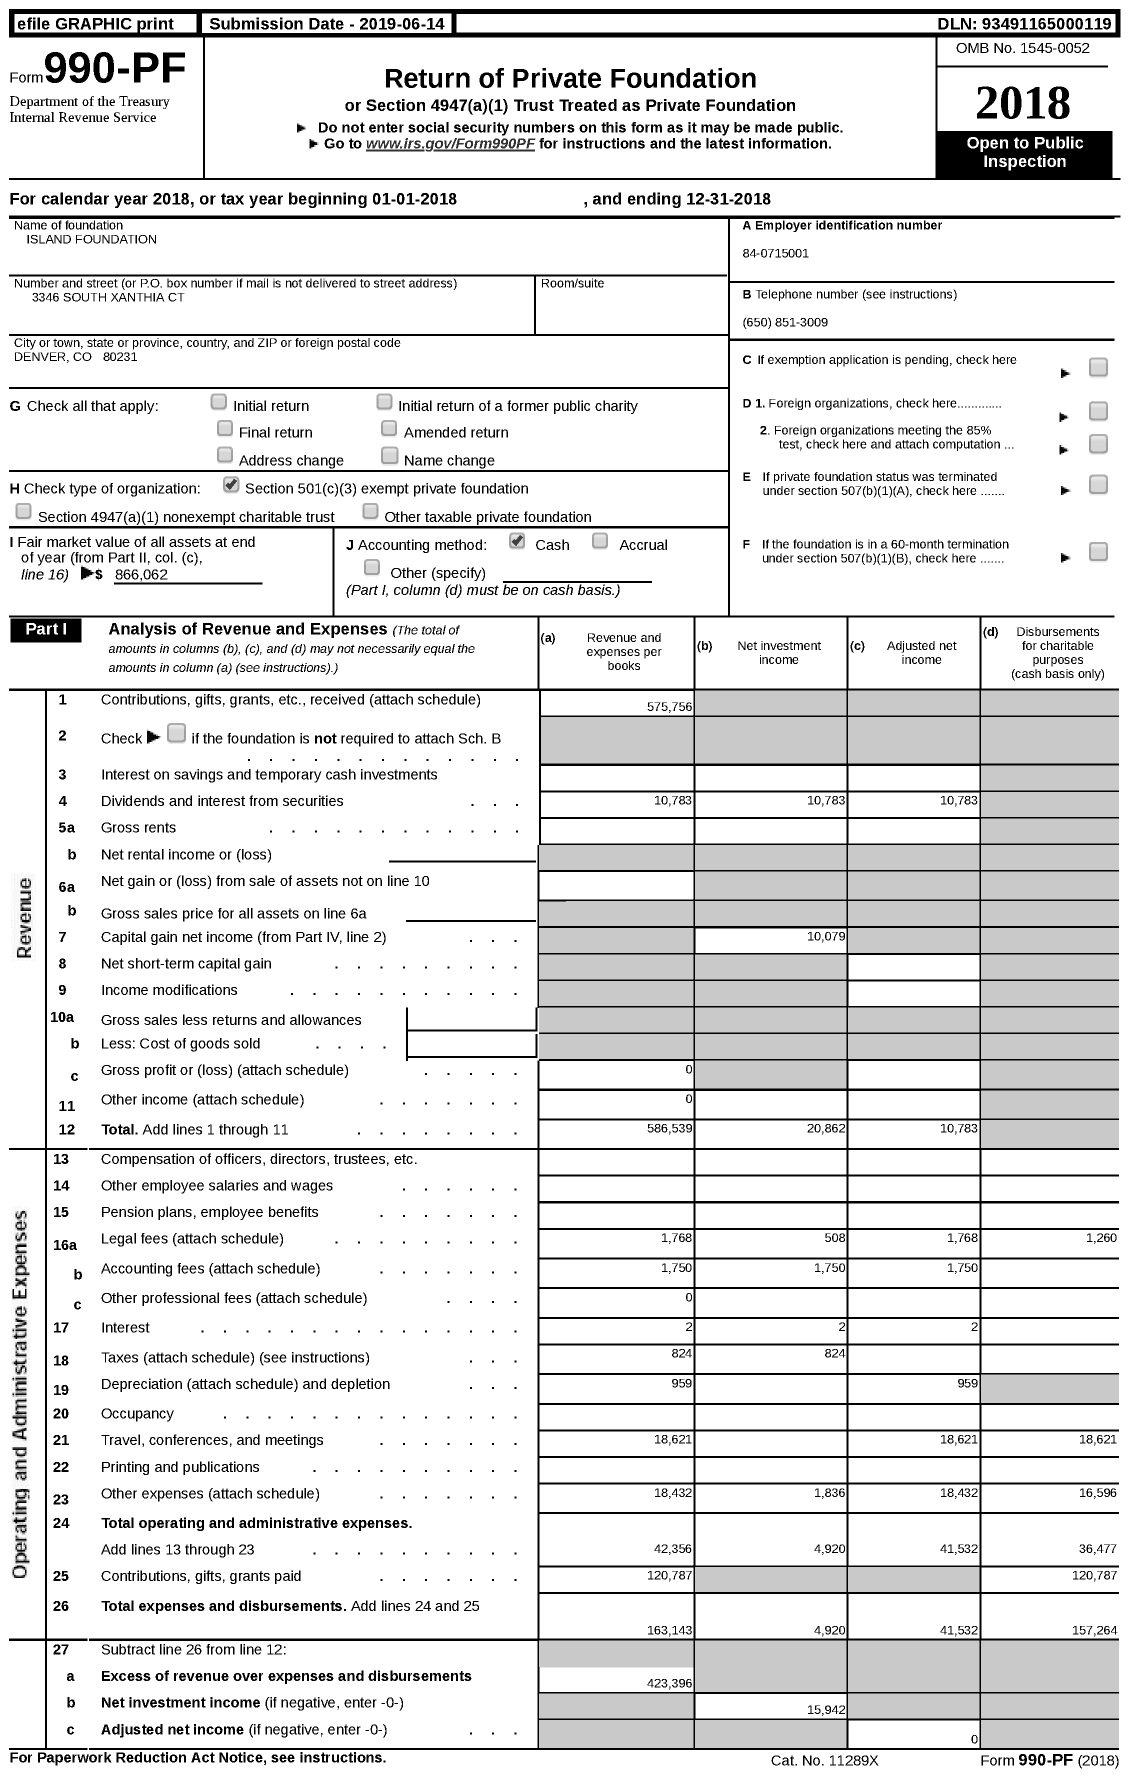 Image of first page of 2018 Form 990PF for Island Foundation